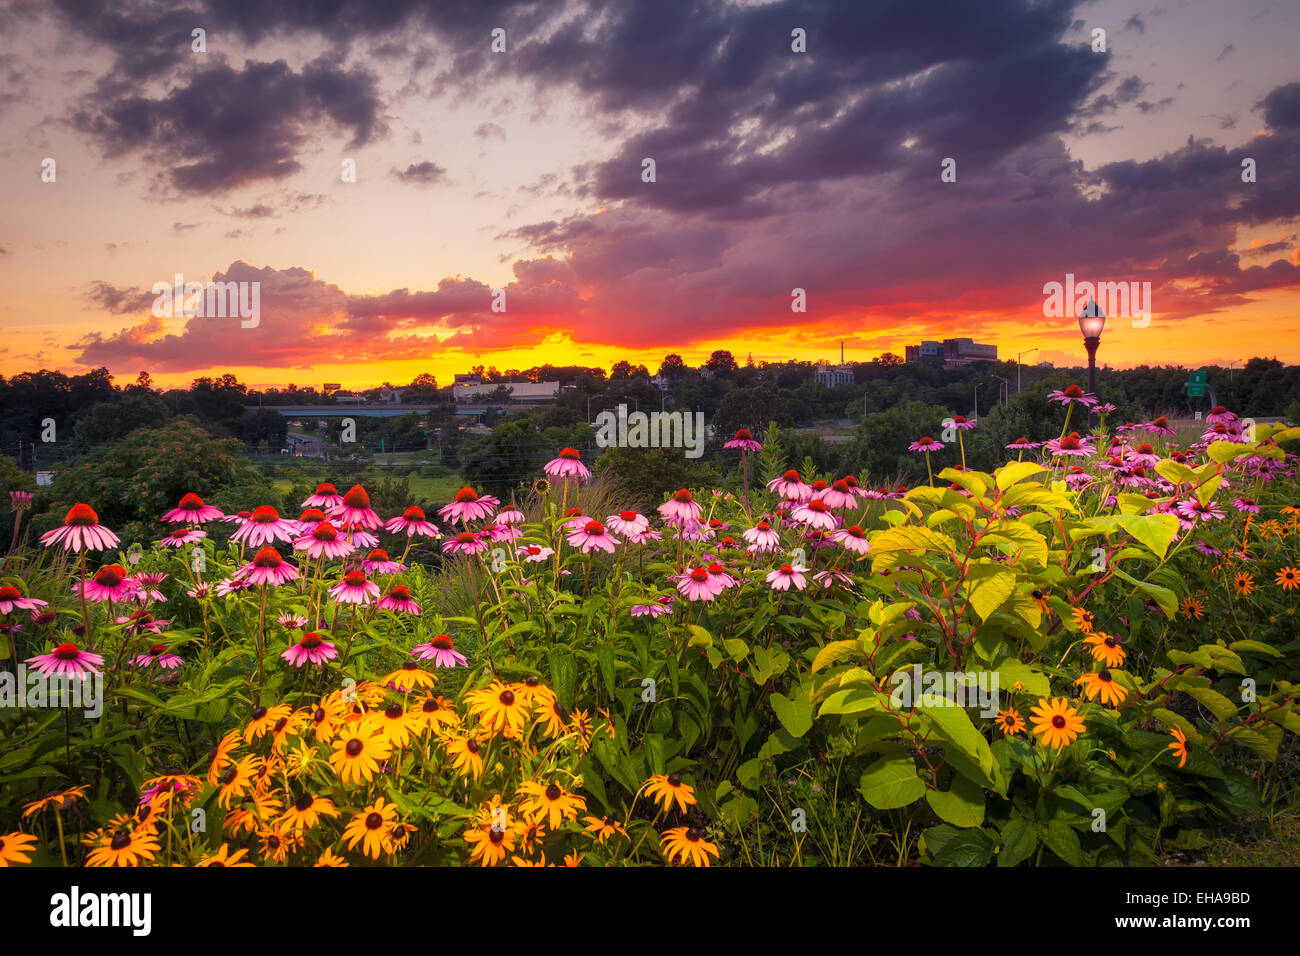 Colorful coneflowers and daisies in a garden by a light post under a vibrant sunset. Stock Photo